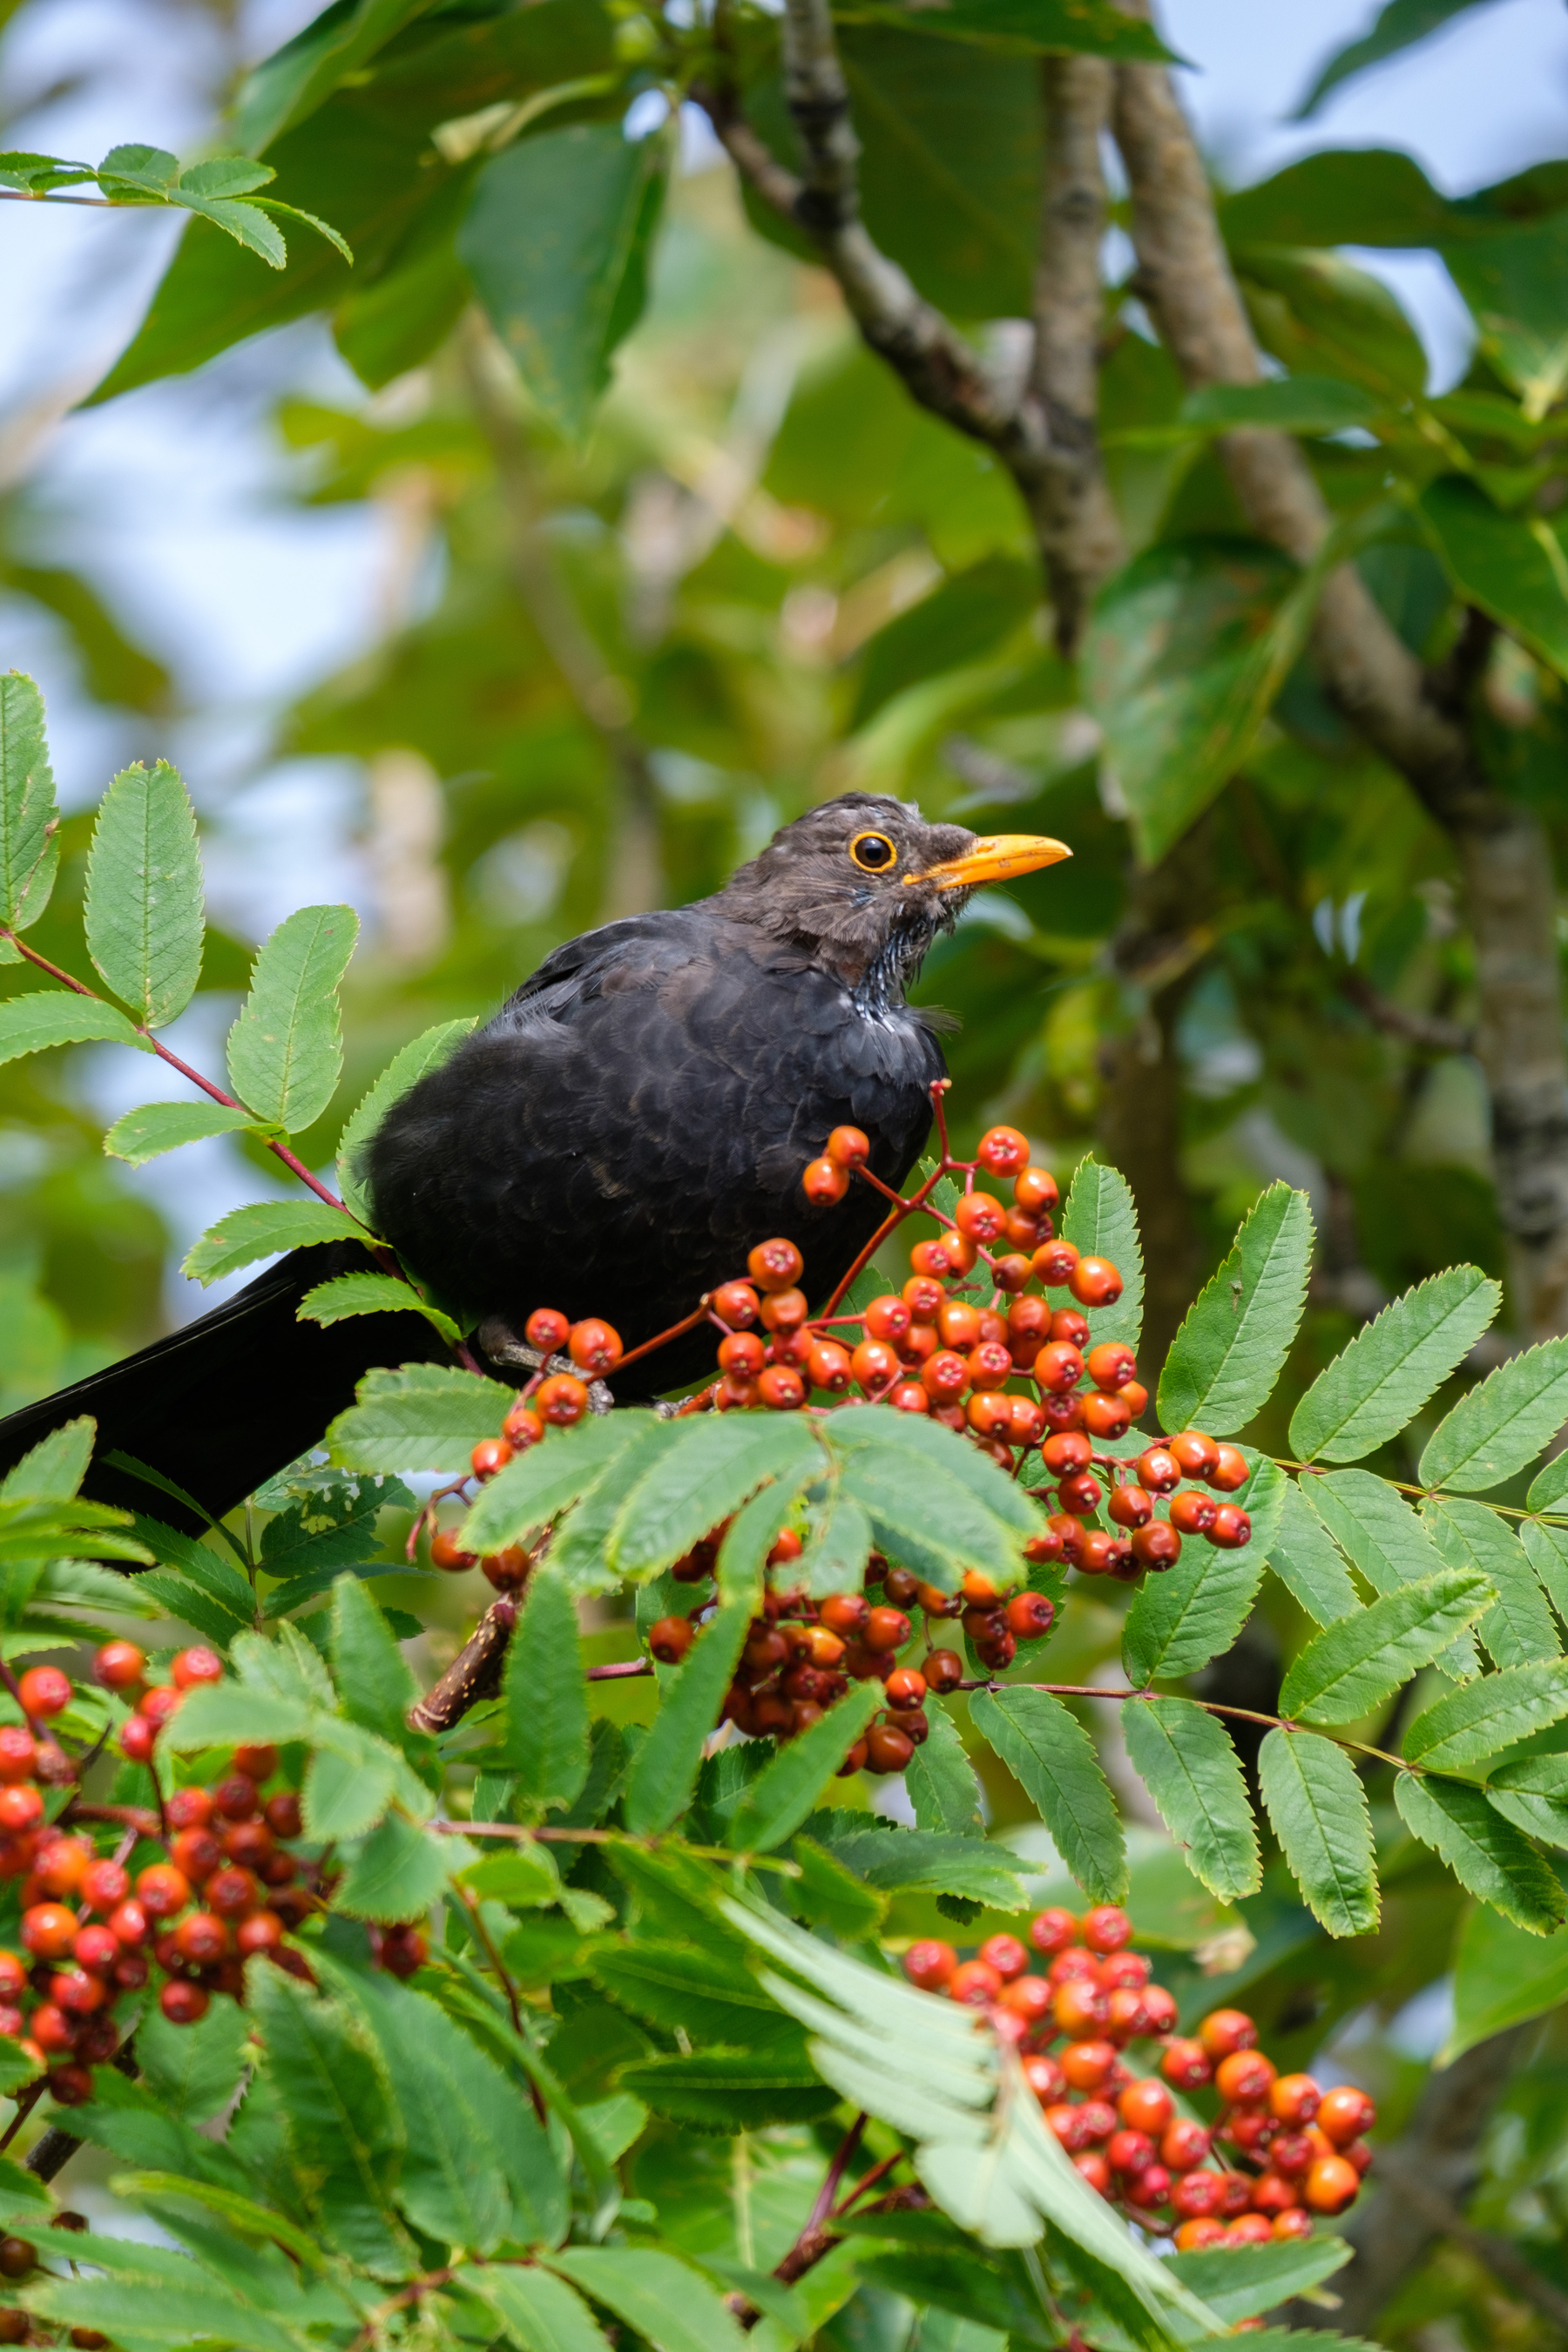 A male blackbird looks at the camera with suspicion in between pecking at the berries in a rowan tree.